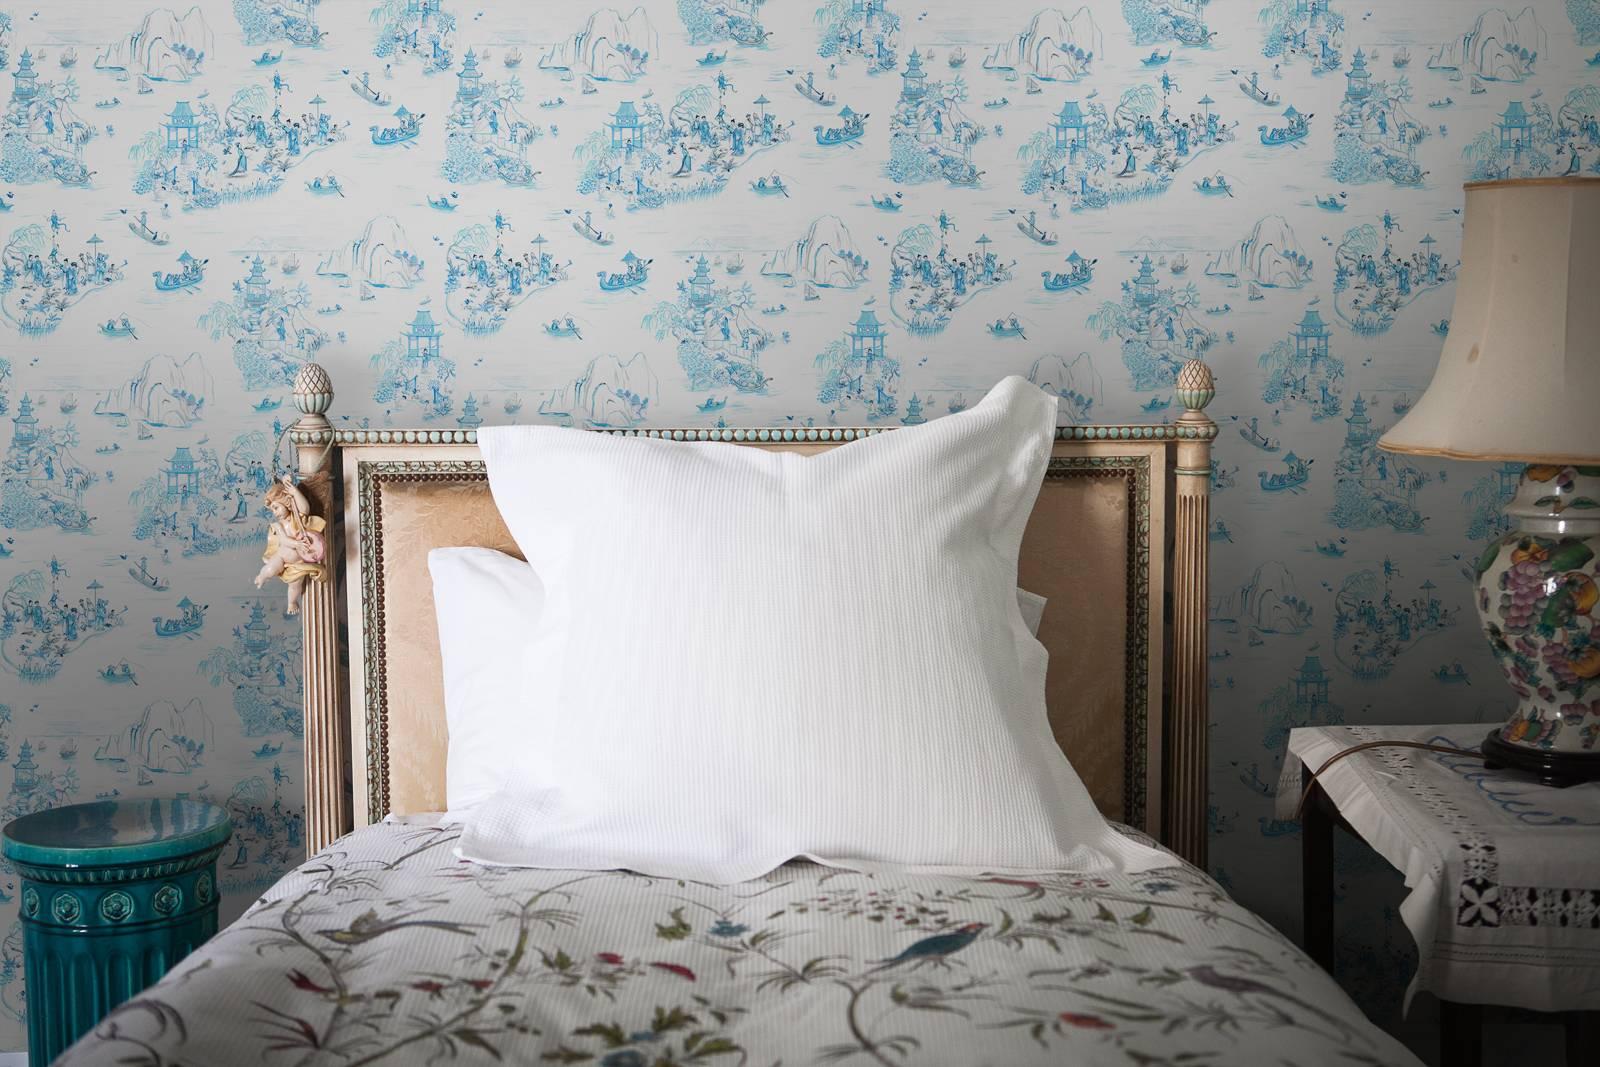 Courtesan Chinoisserie is created by Frederick Wimsett for Flat Space Design. 

This is from the Urban and Rural collection.

Available in three colours:
Design one - Marchesa Casati Courtesan Chinoisserie (blue)
Design two - Gold on white